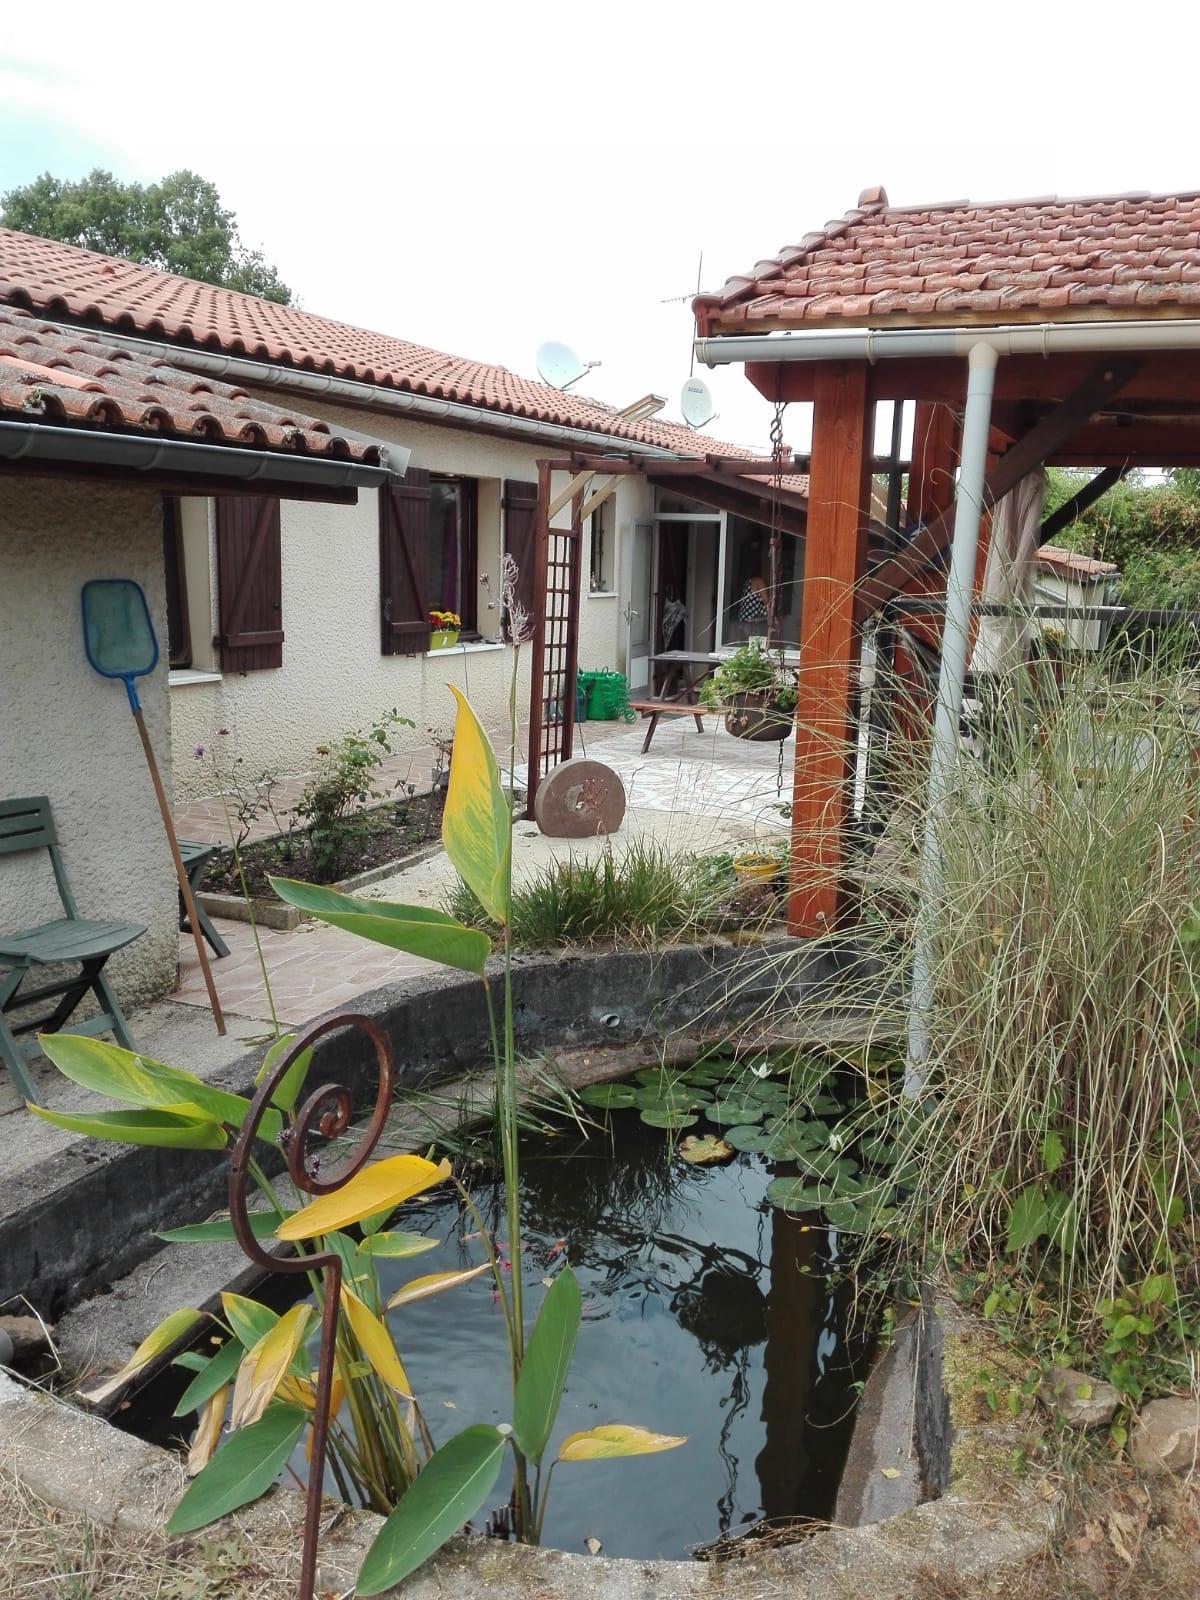 Picture of Bungalow For Sale in Angouleme, Poitou Charentes, France